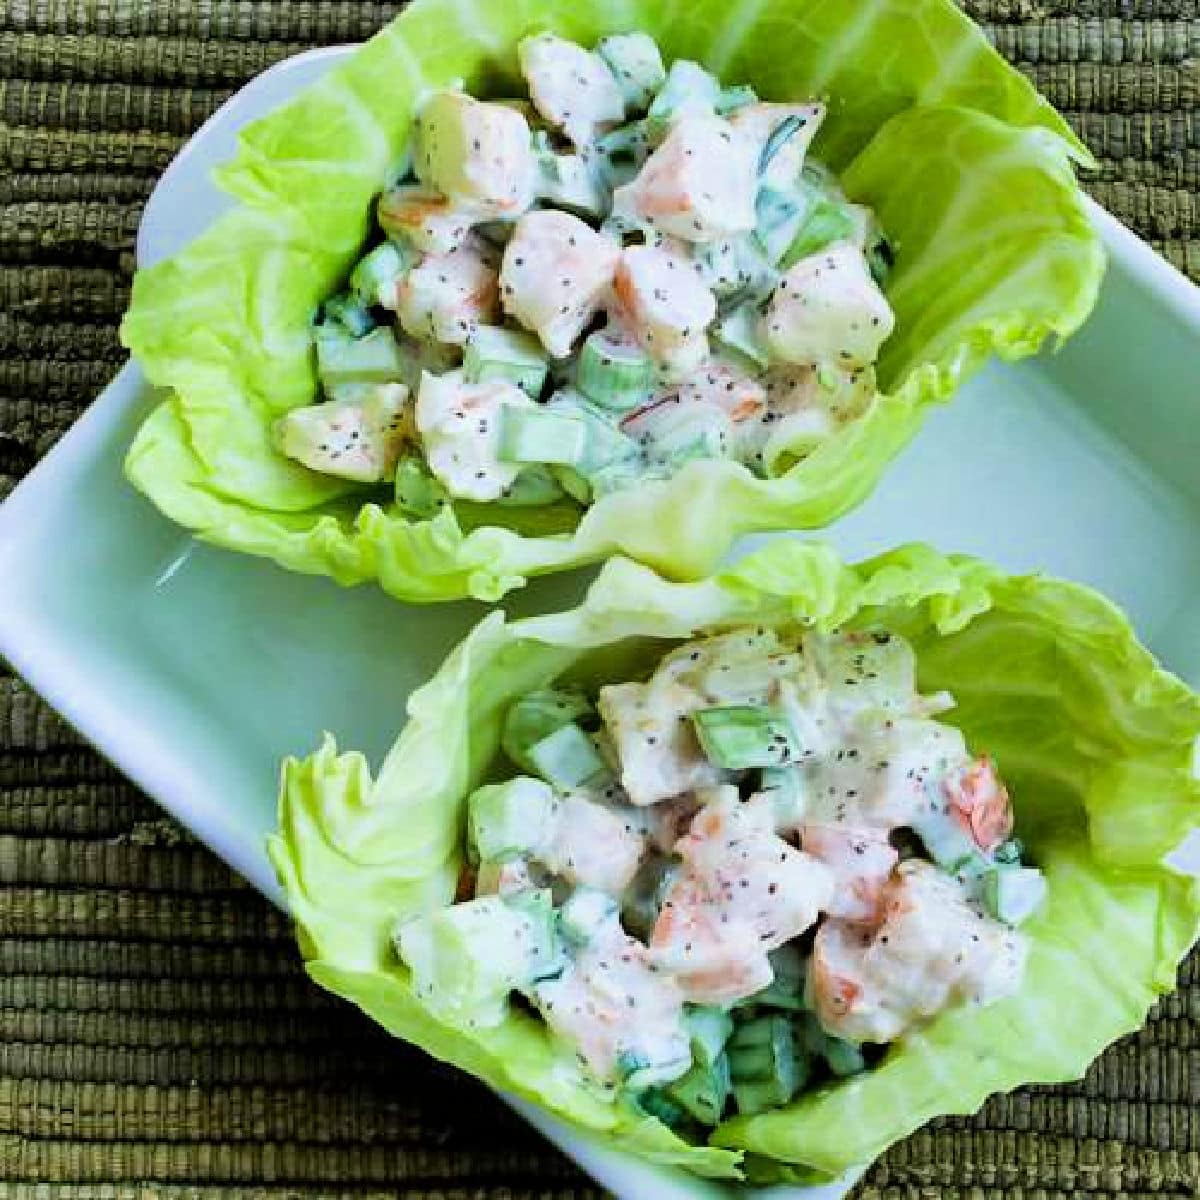 Shrimp Salad Wraps with two wraps shown in cabbage leaves.